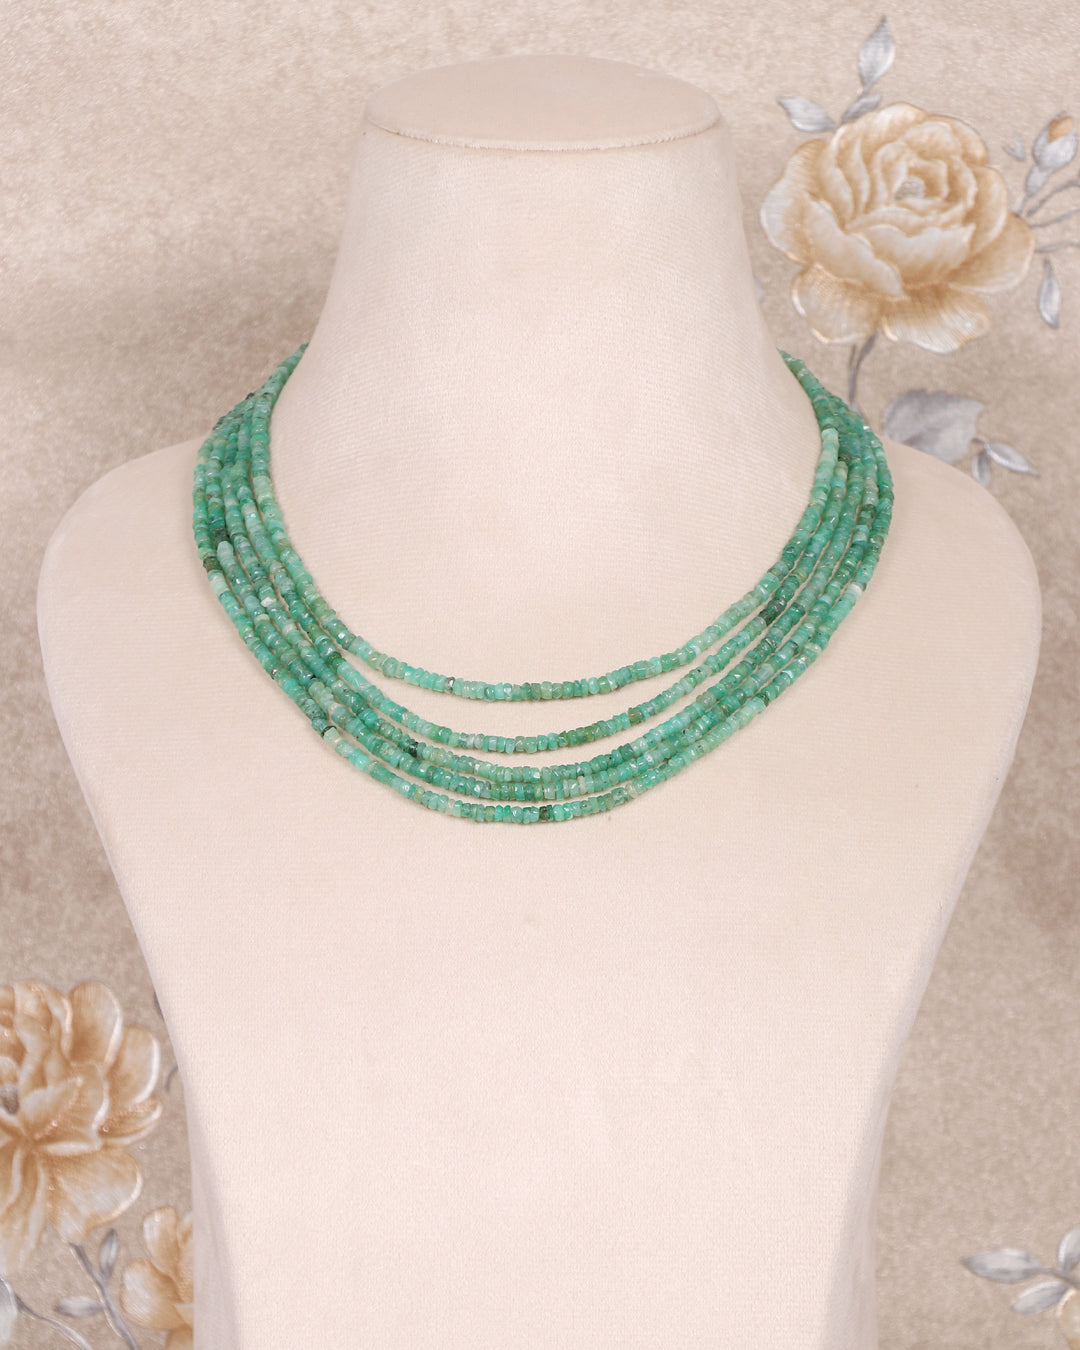 Natural Emerald Shaded Gemstone Beads Necklace Jewelry